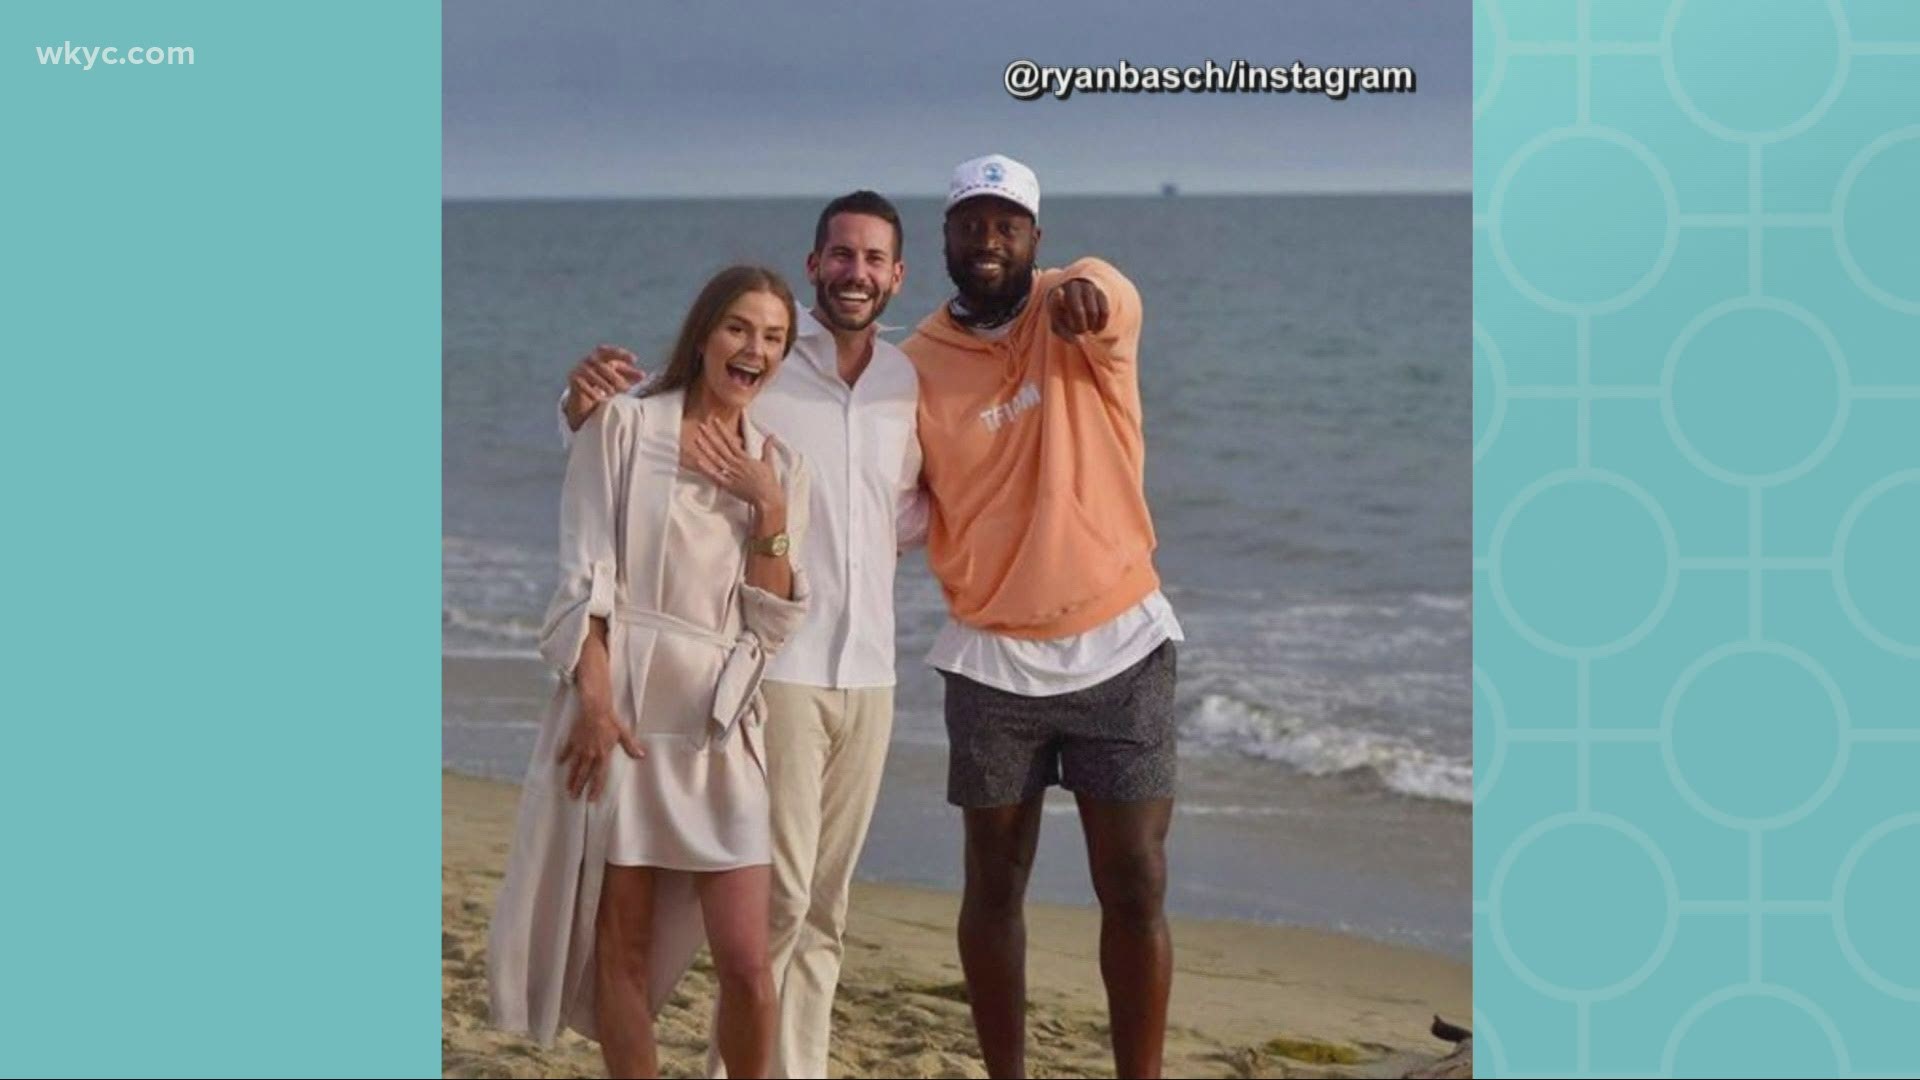 NBA star Dwayne Wade was only going for a walk on the beach. That is until he happened to stumble upon a proposal in progress! Watch to see how it turned out.